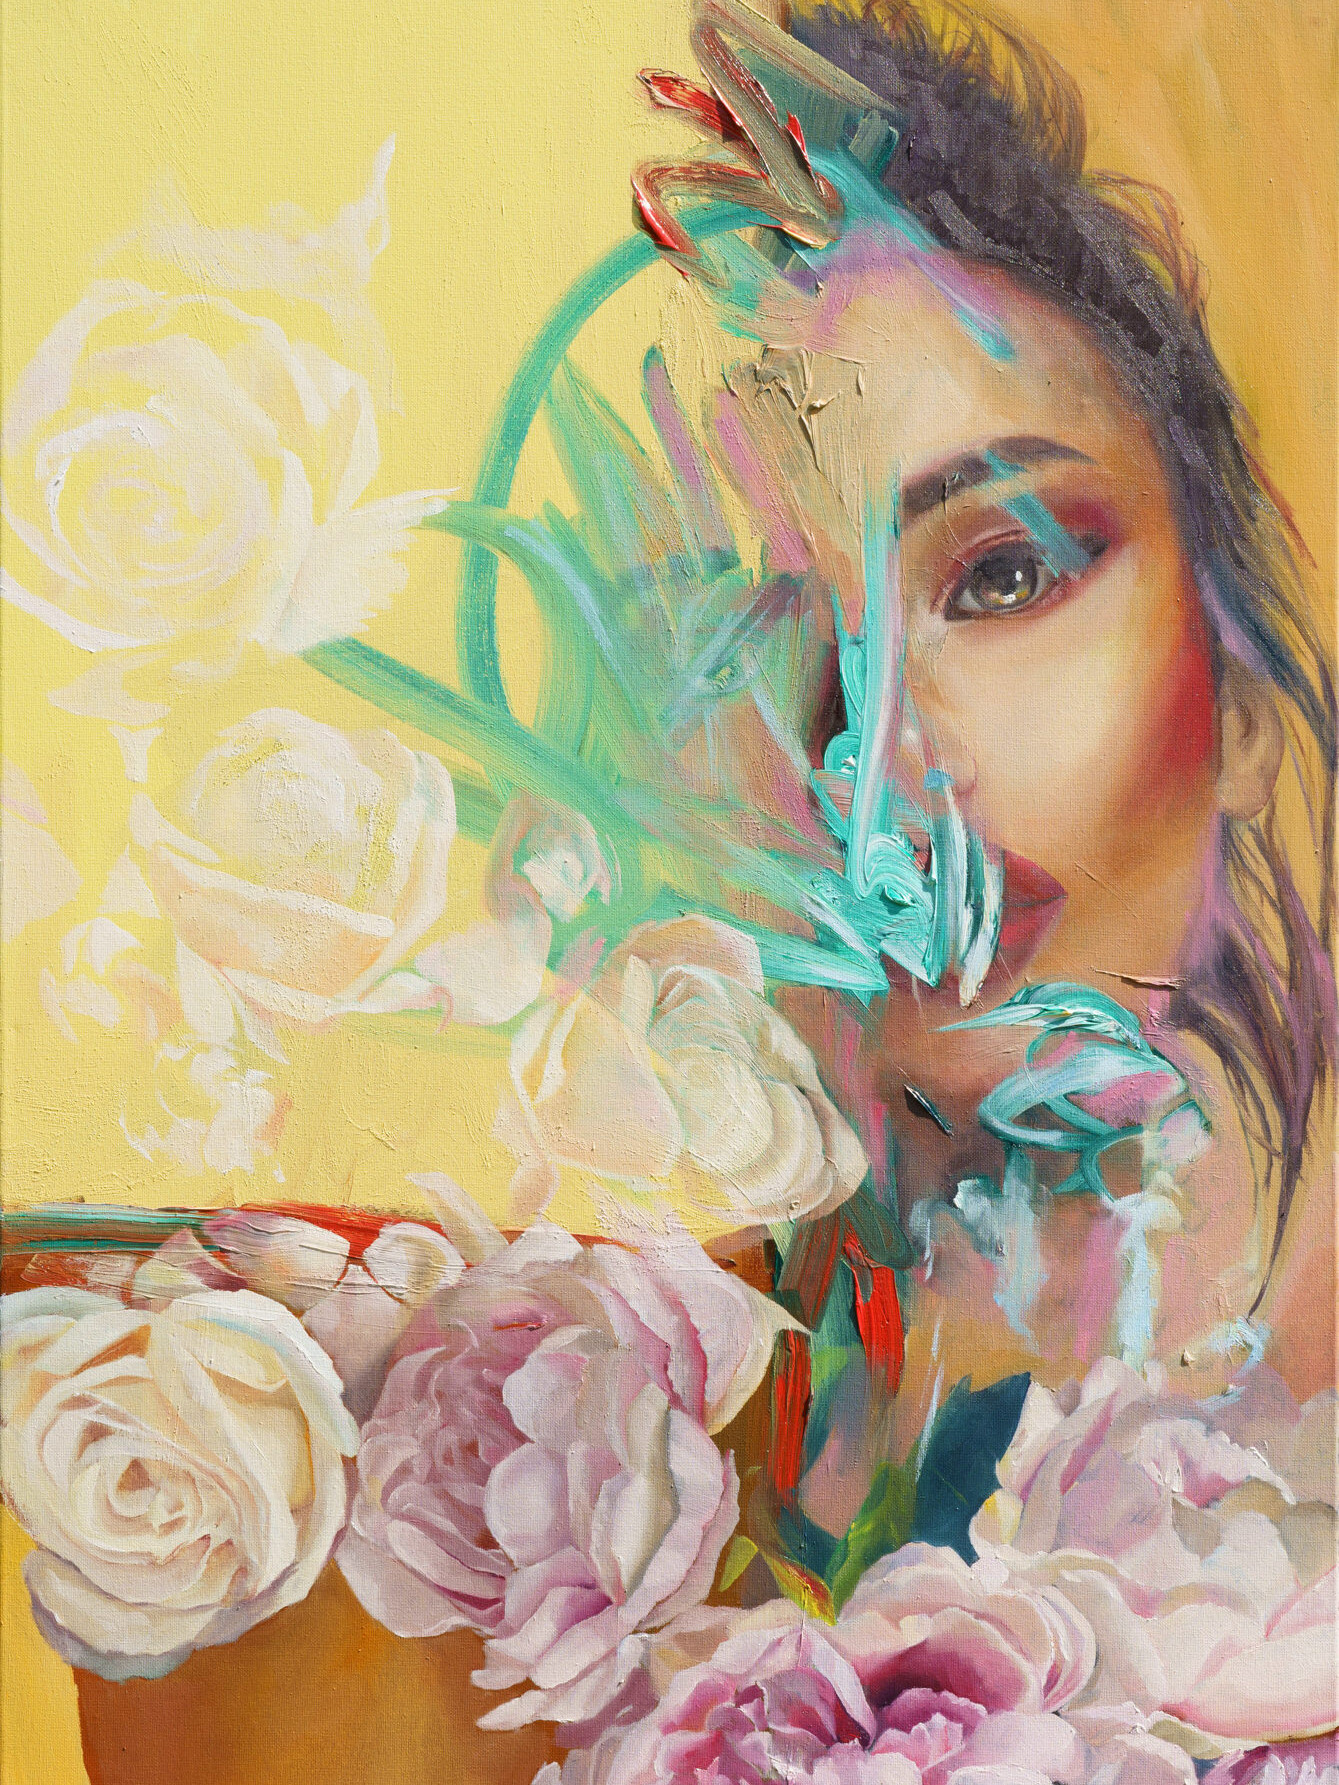 Oil painting by Alex Righetto, part of the 'Perfectly Imperfect' collection, showcasing a woman's portrait with abstract elements.